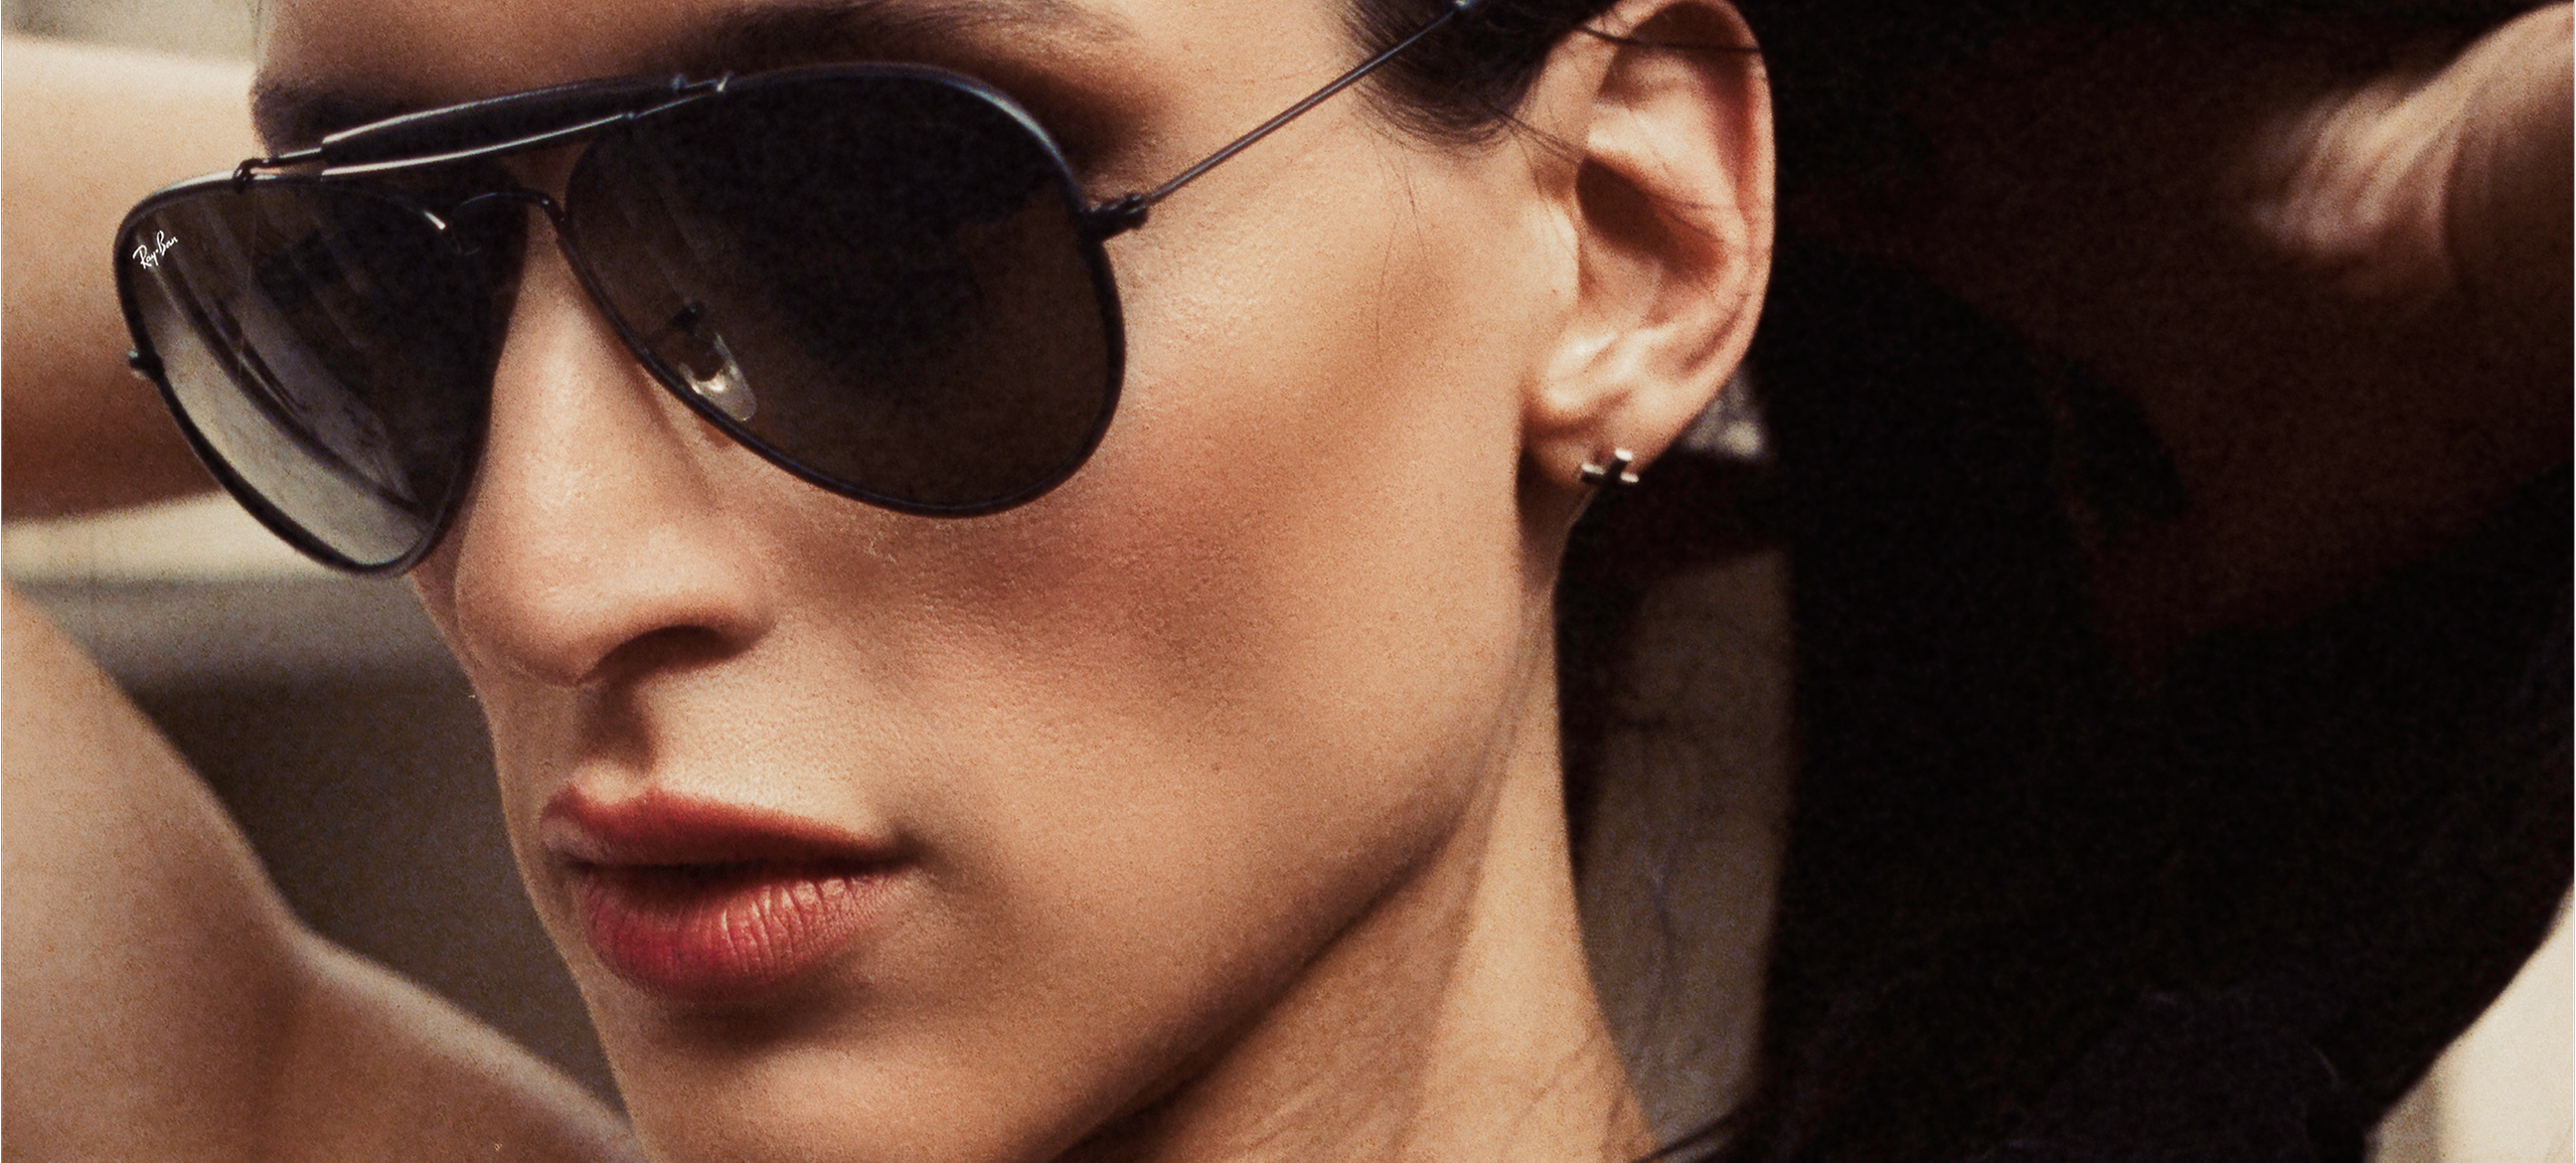 Aviator Limited Edition Sunglasses in Black and Dark Grey | Ray-Ban®